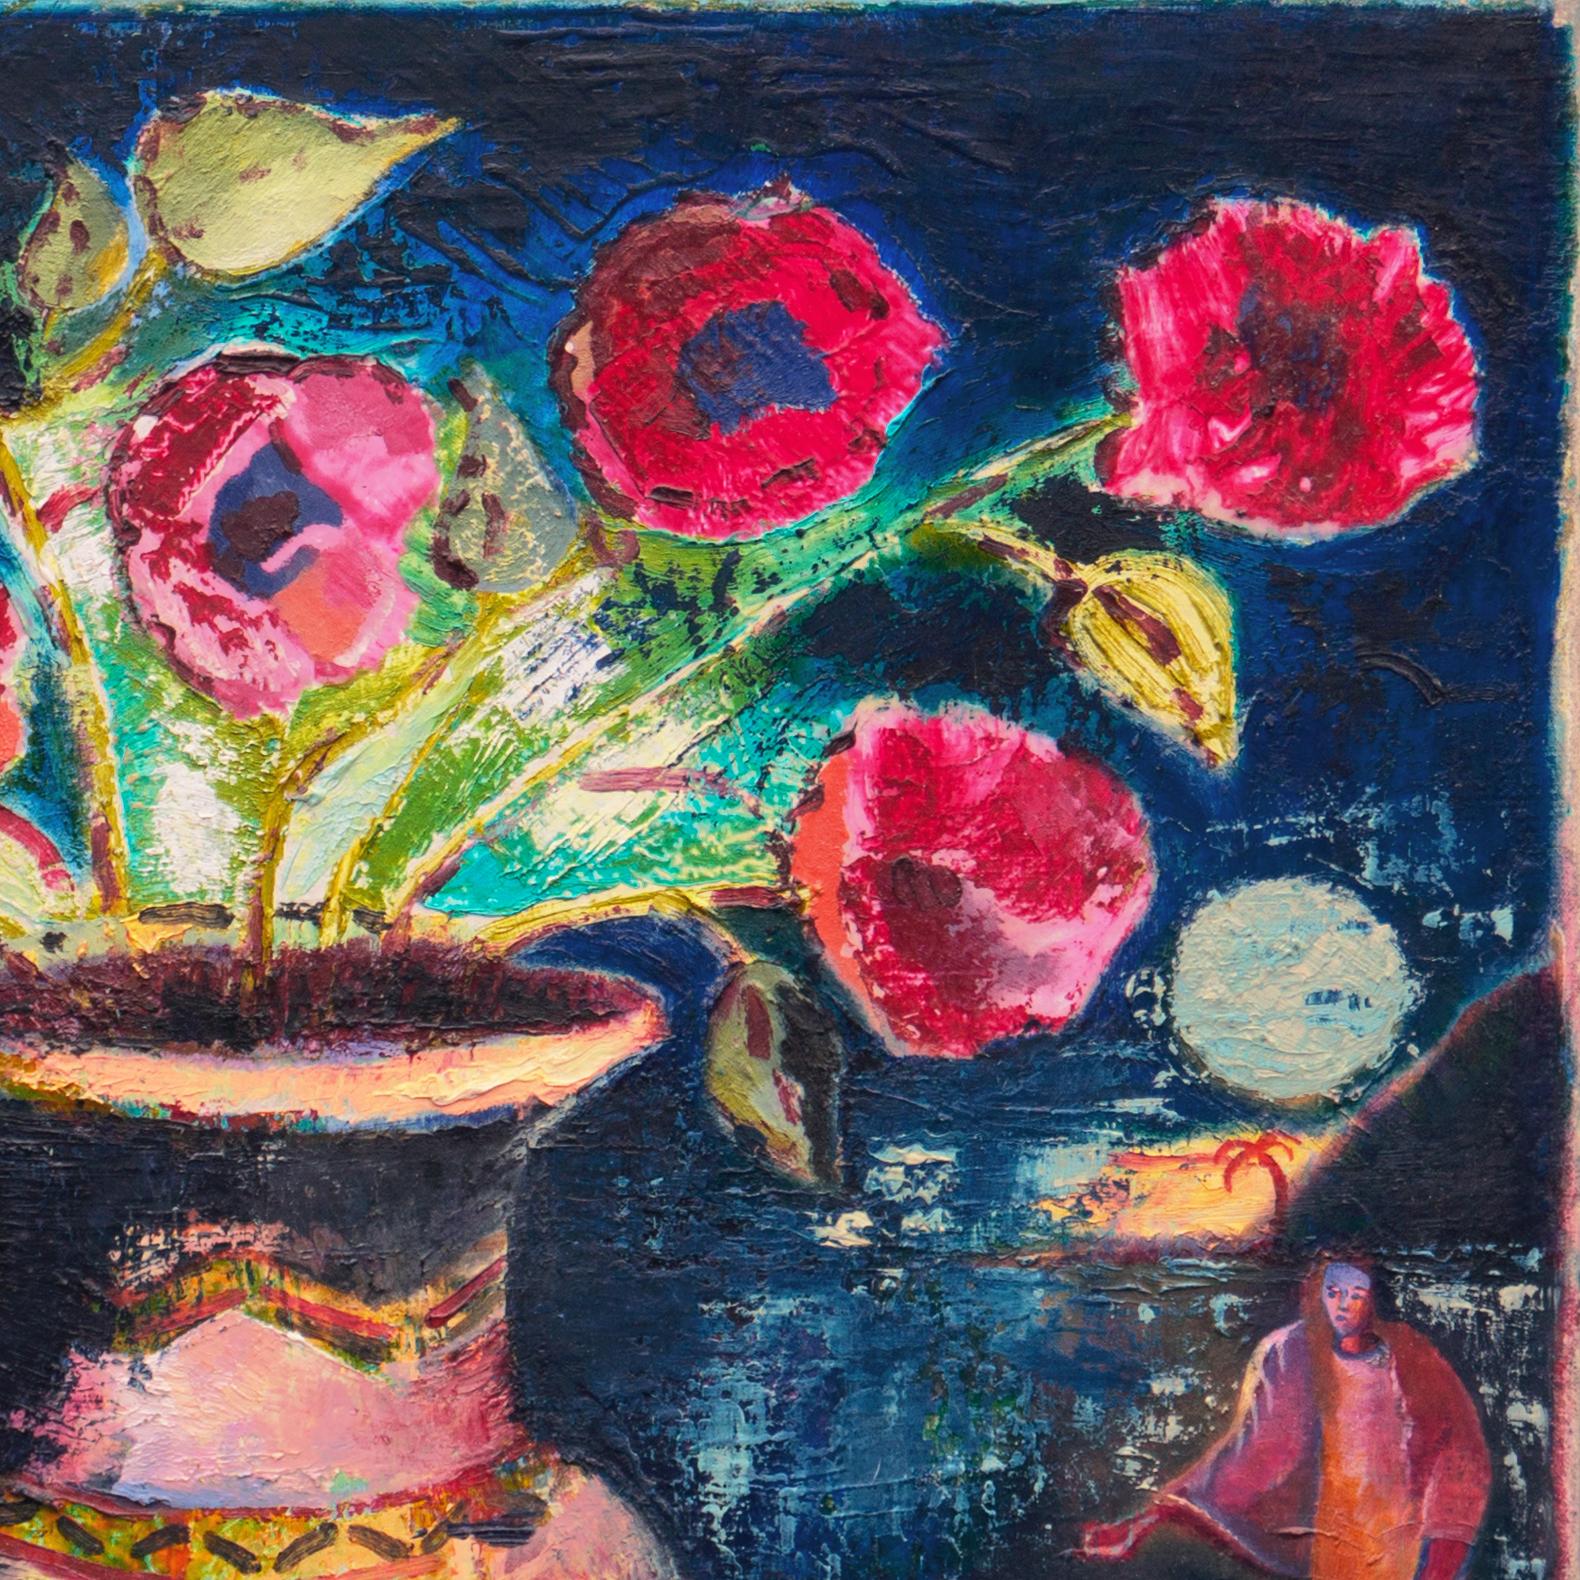 'Still Life, Roses with Figure Approaching', German Expressionist, Robert Graves - Modern Painting by Karl Goldschmidt